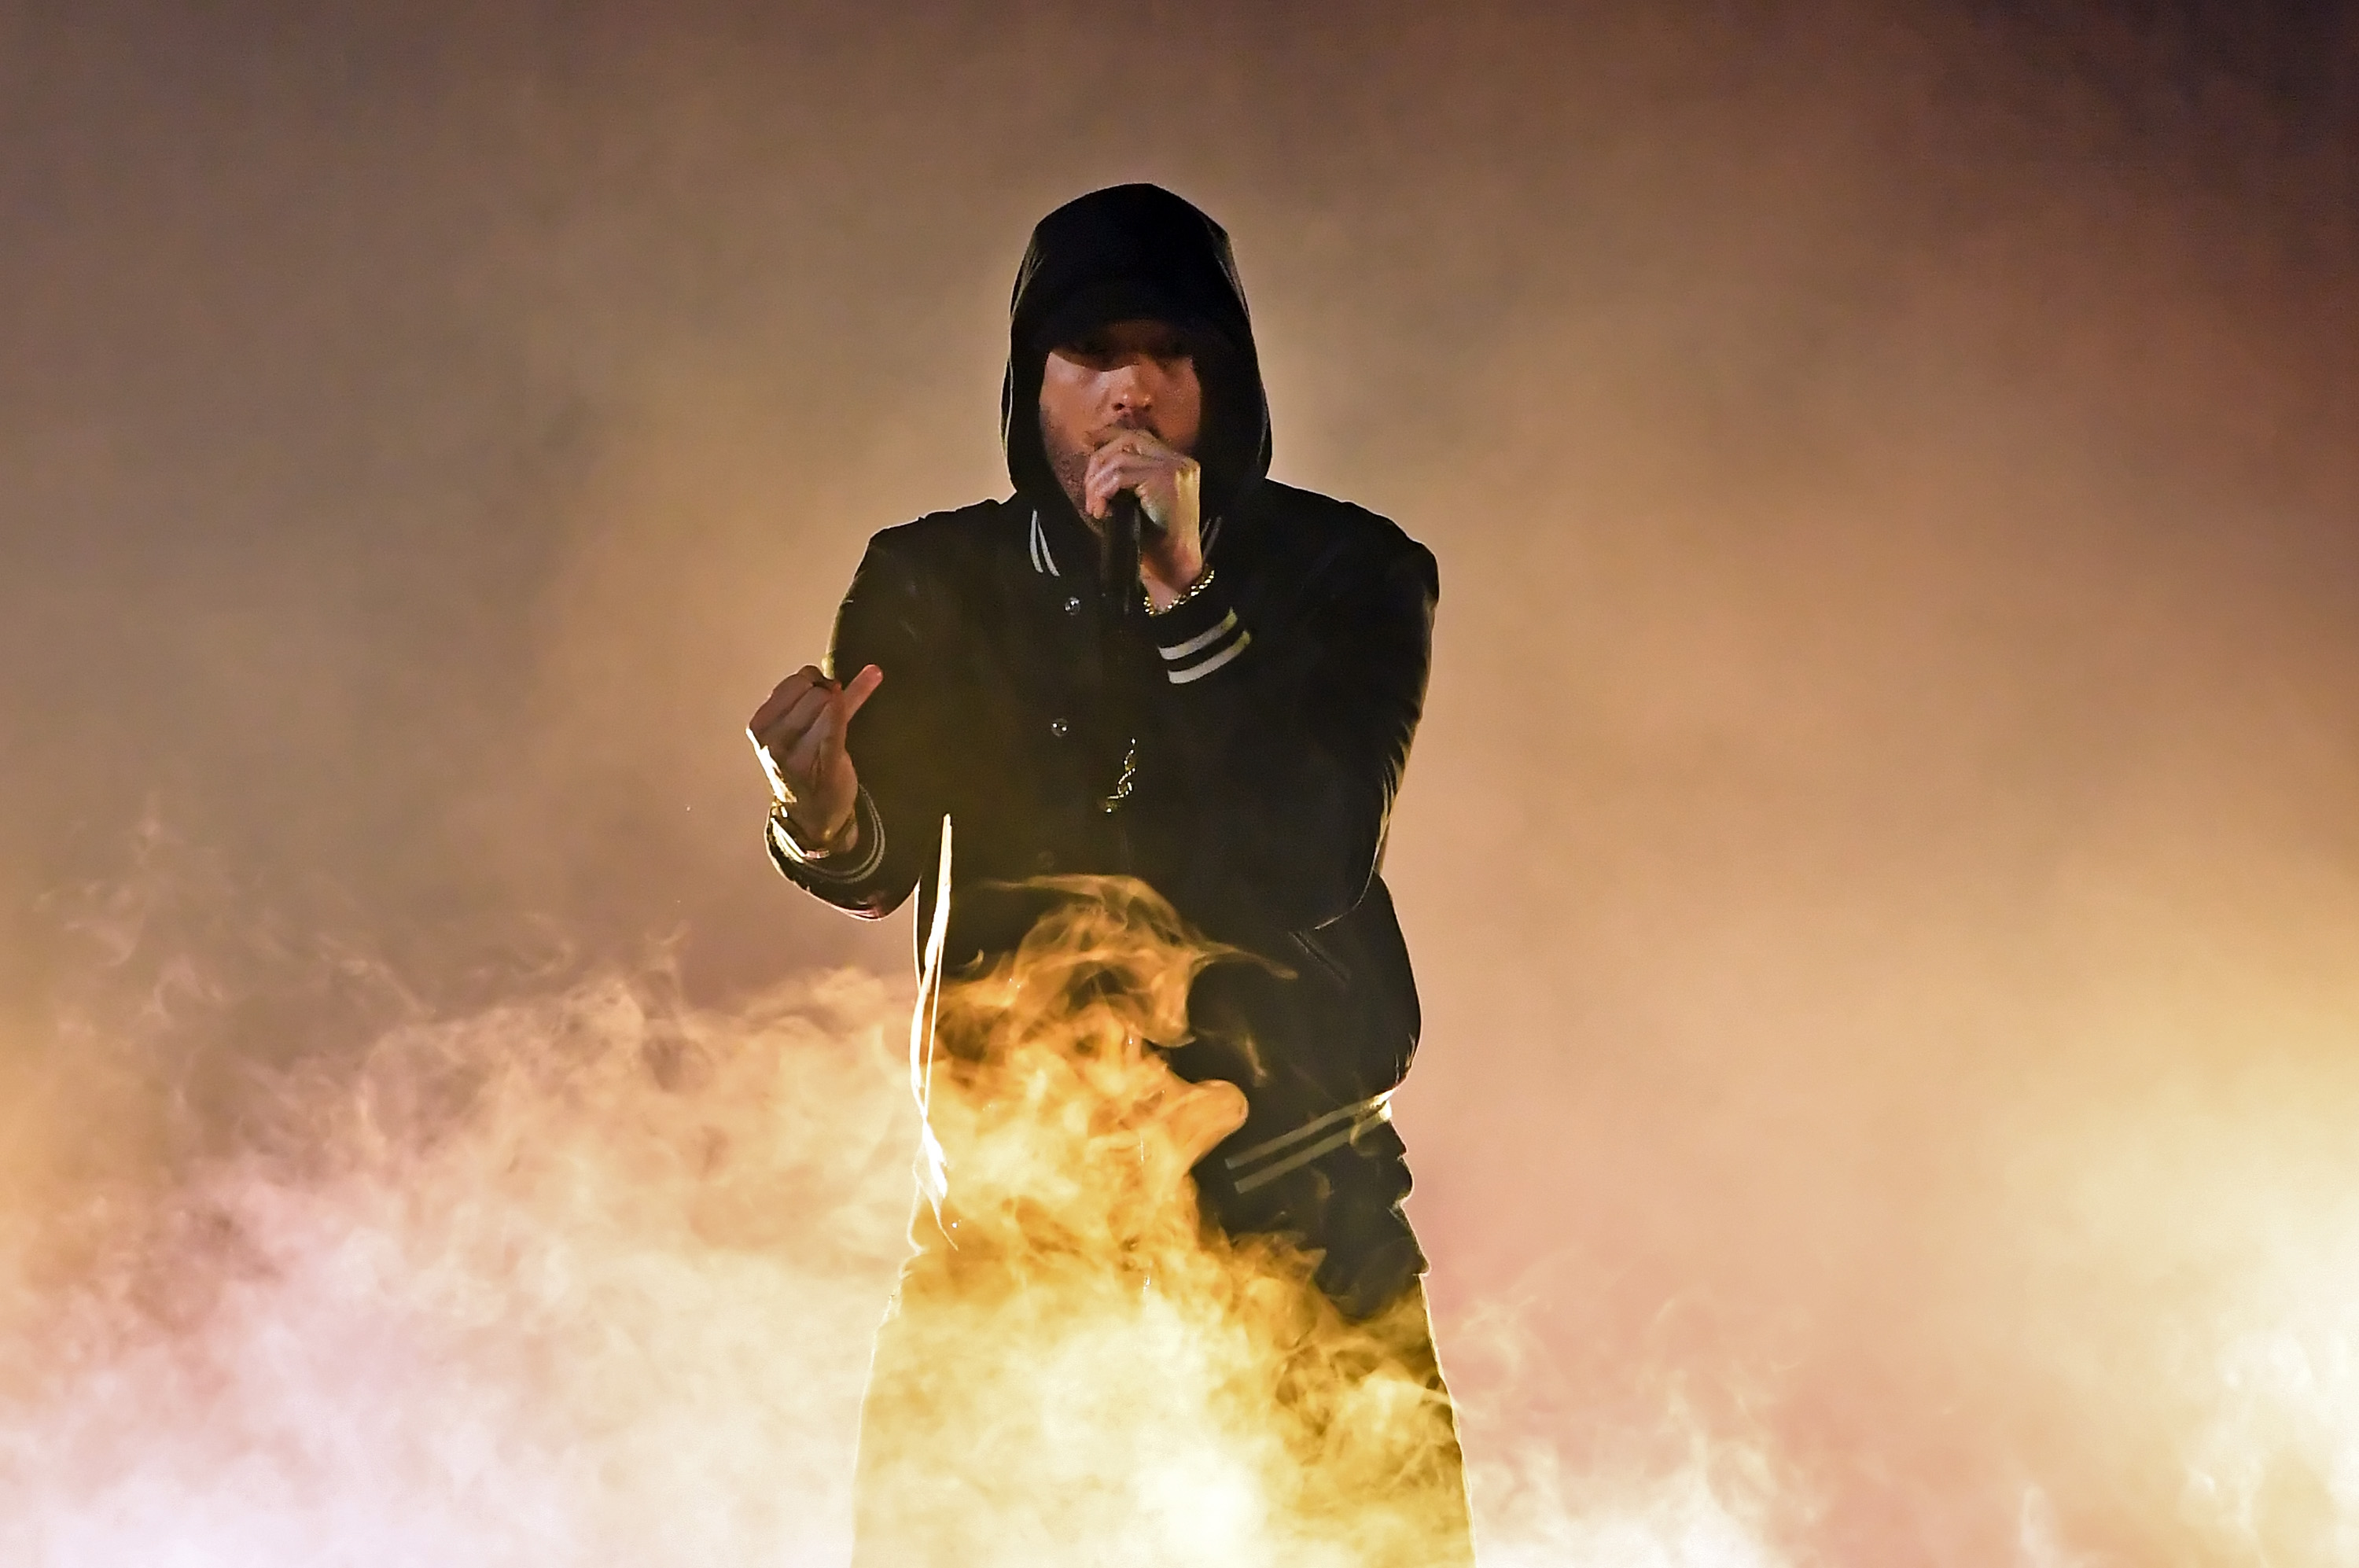 Eminem Releases Surprise Album “Music To Be Murdered By”